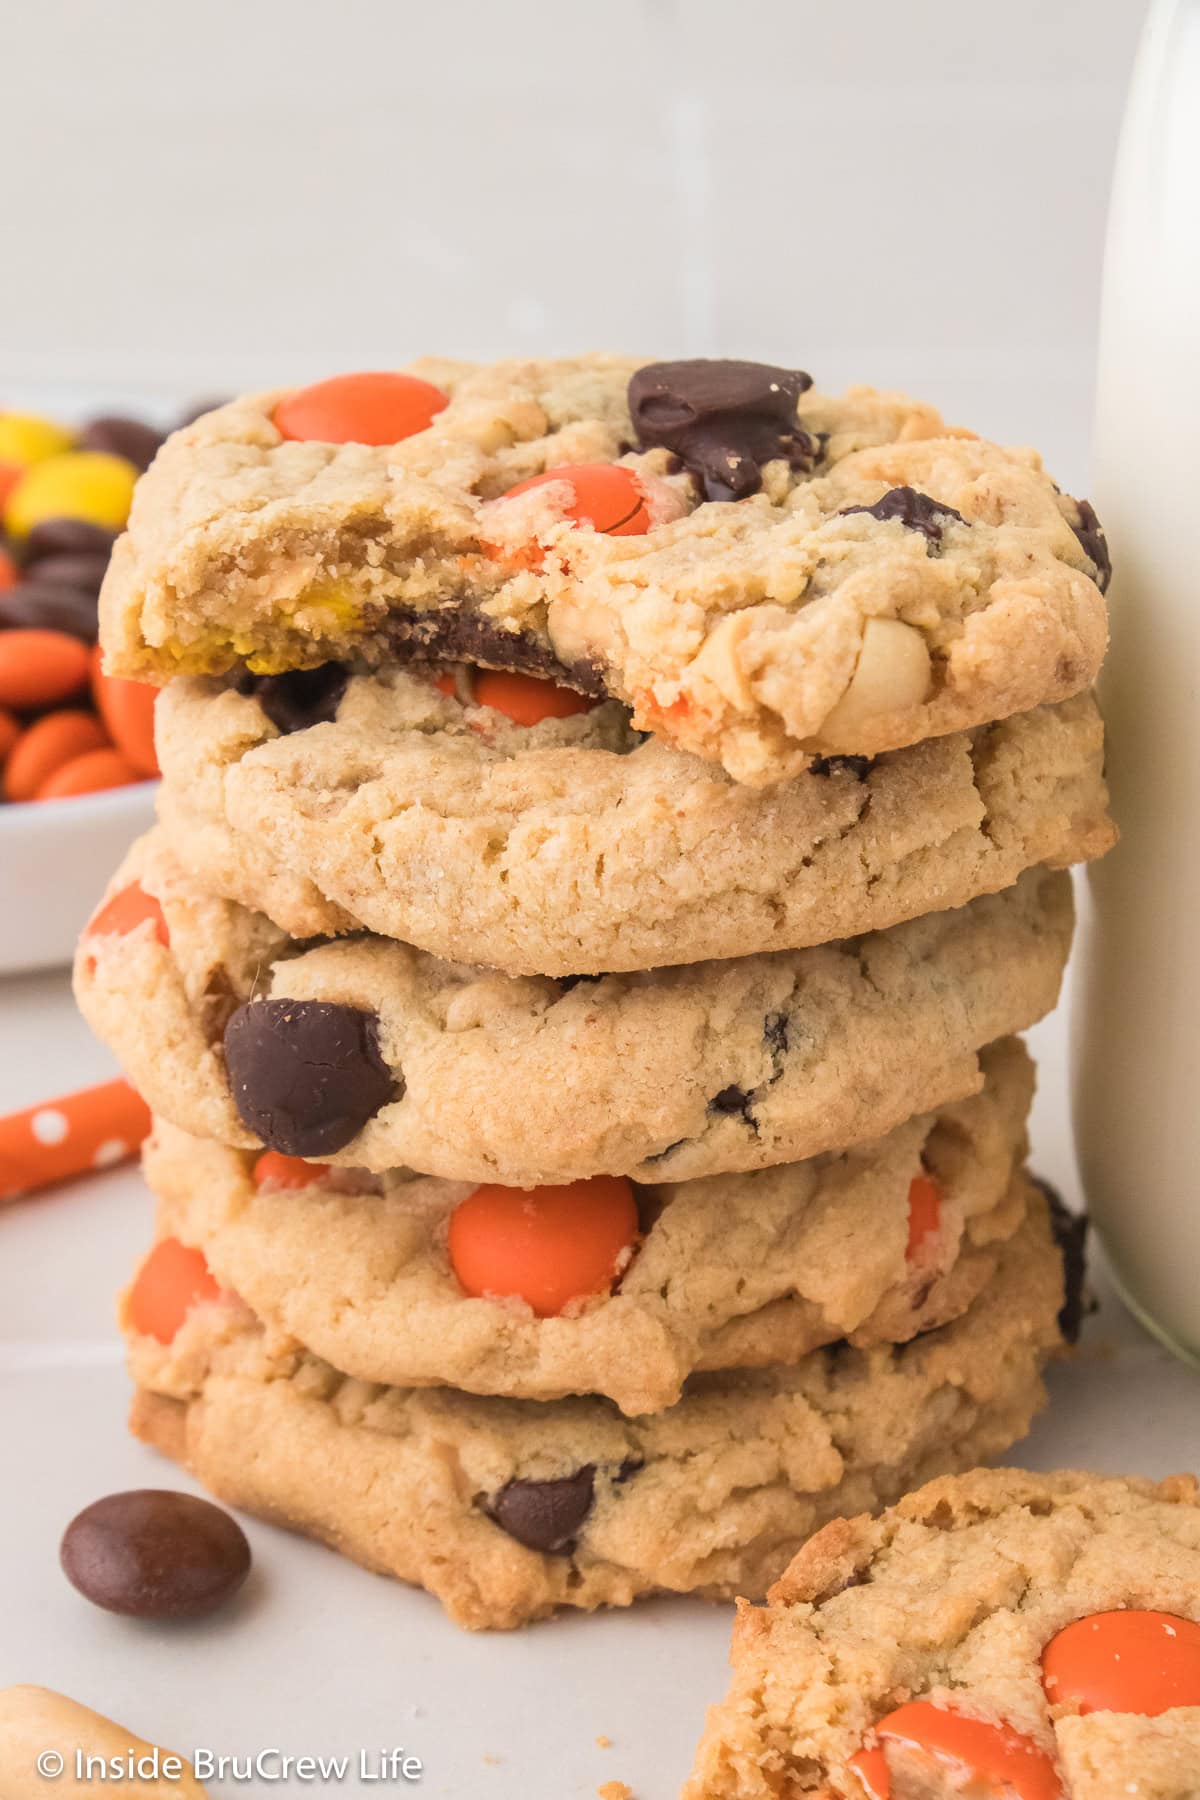 A stack of cookies by a jar of milk.